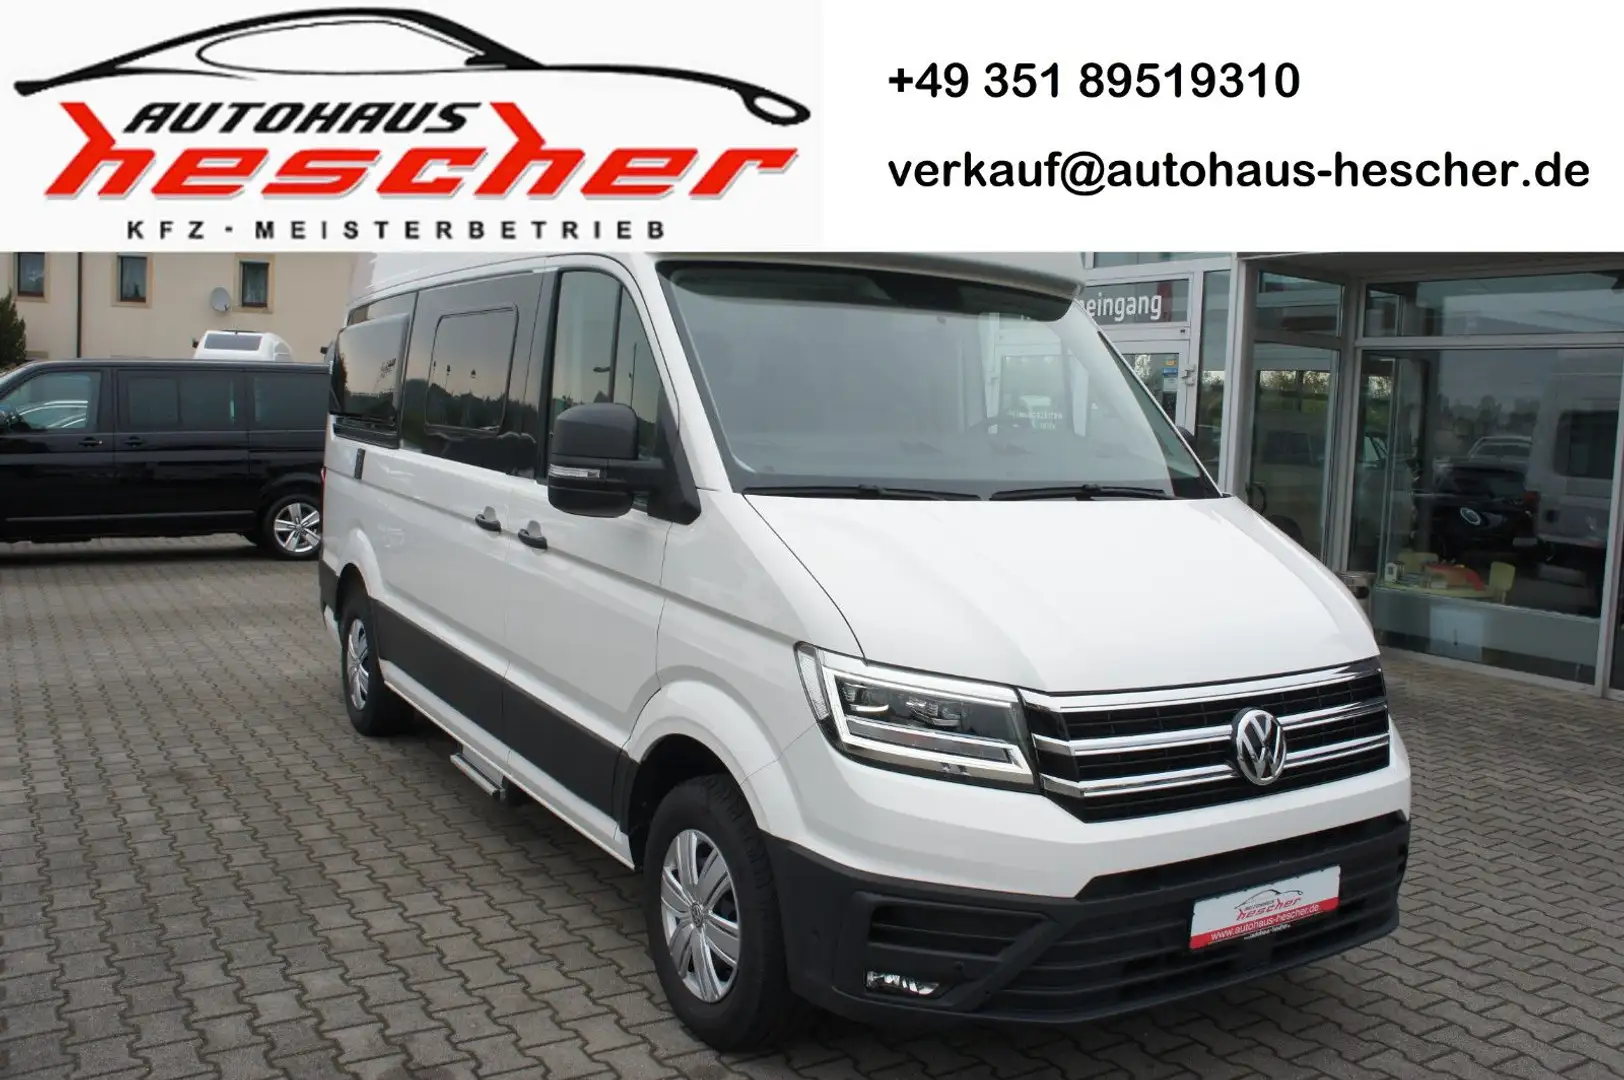 Volkswagen Crafter Grand California 600 FWD*LED*SOLAR*NAVI* Wit - 1